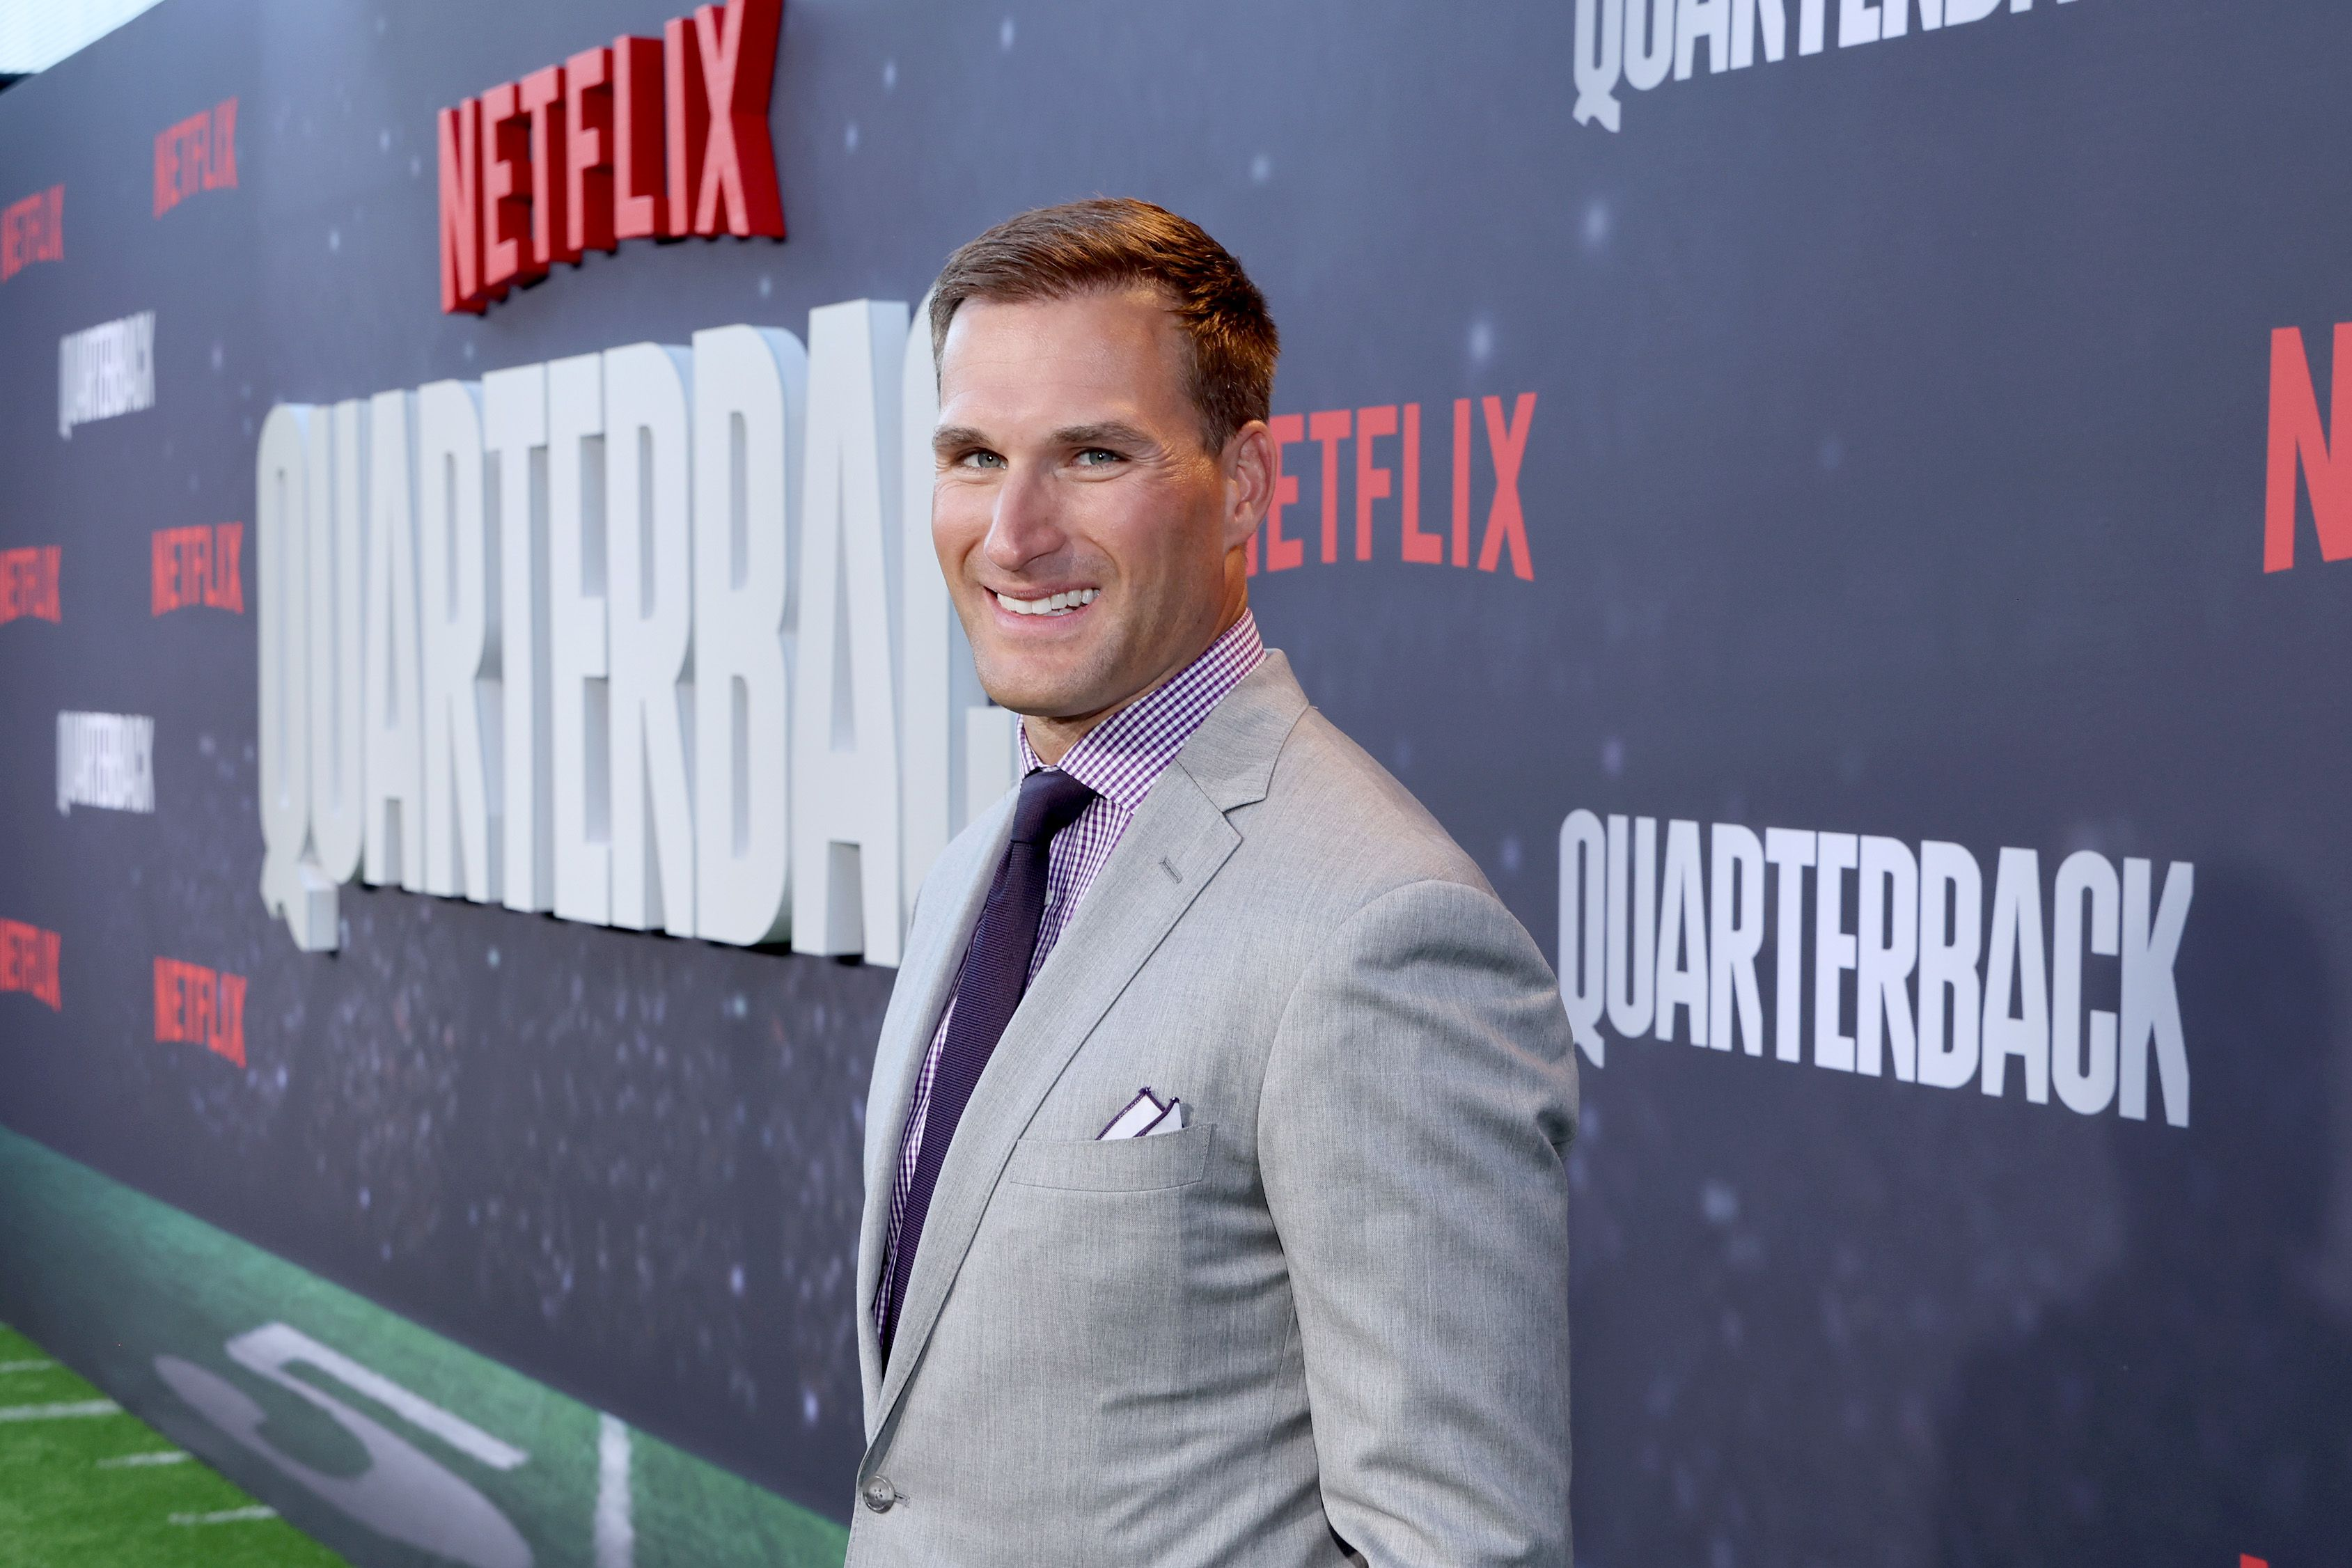 Kirk Cousins is featured in the Netflix show 'Quarterbacks'